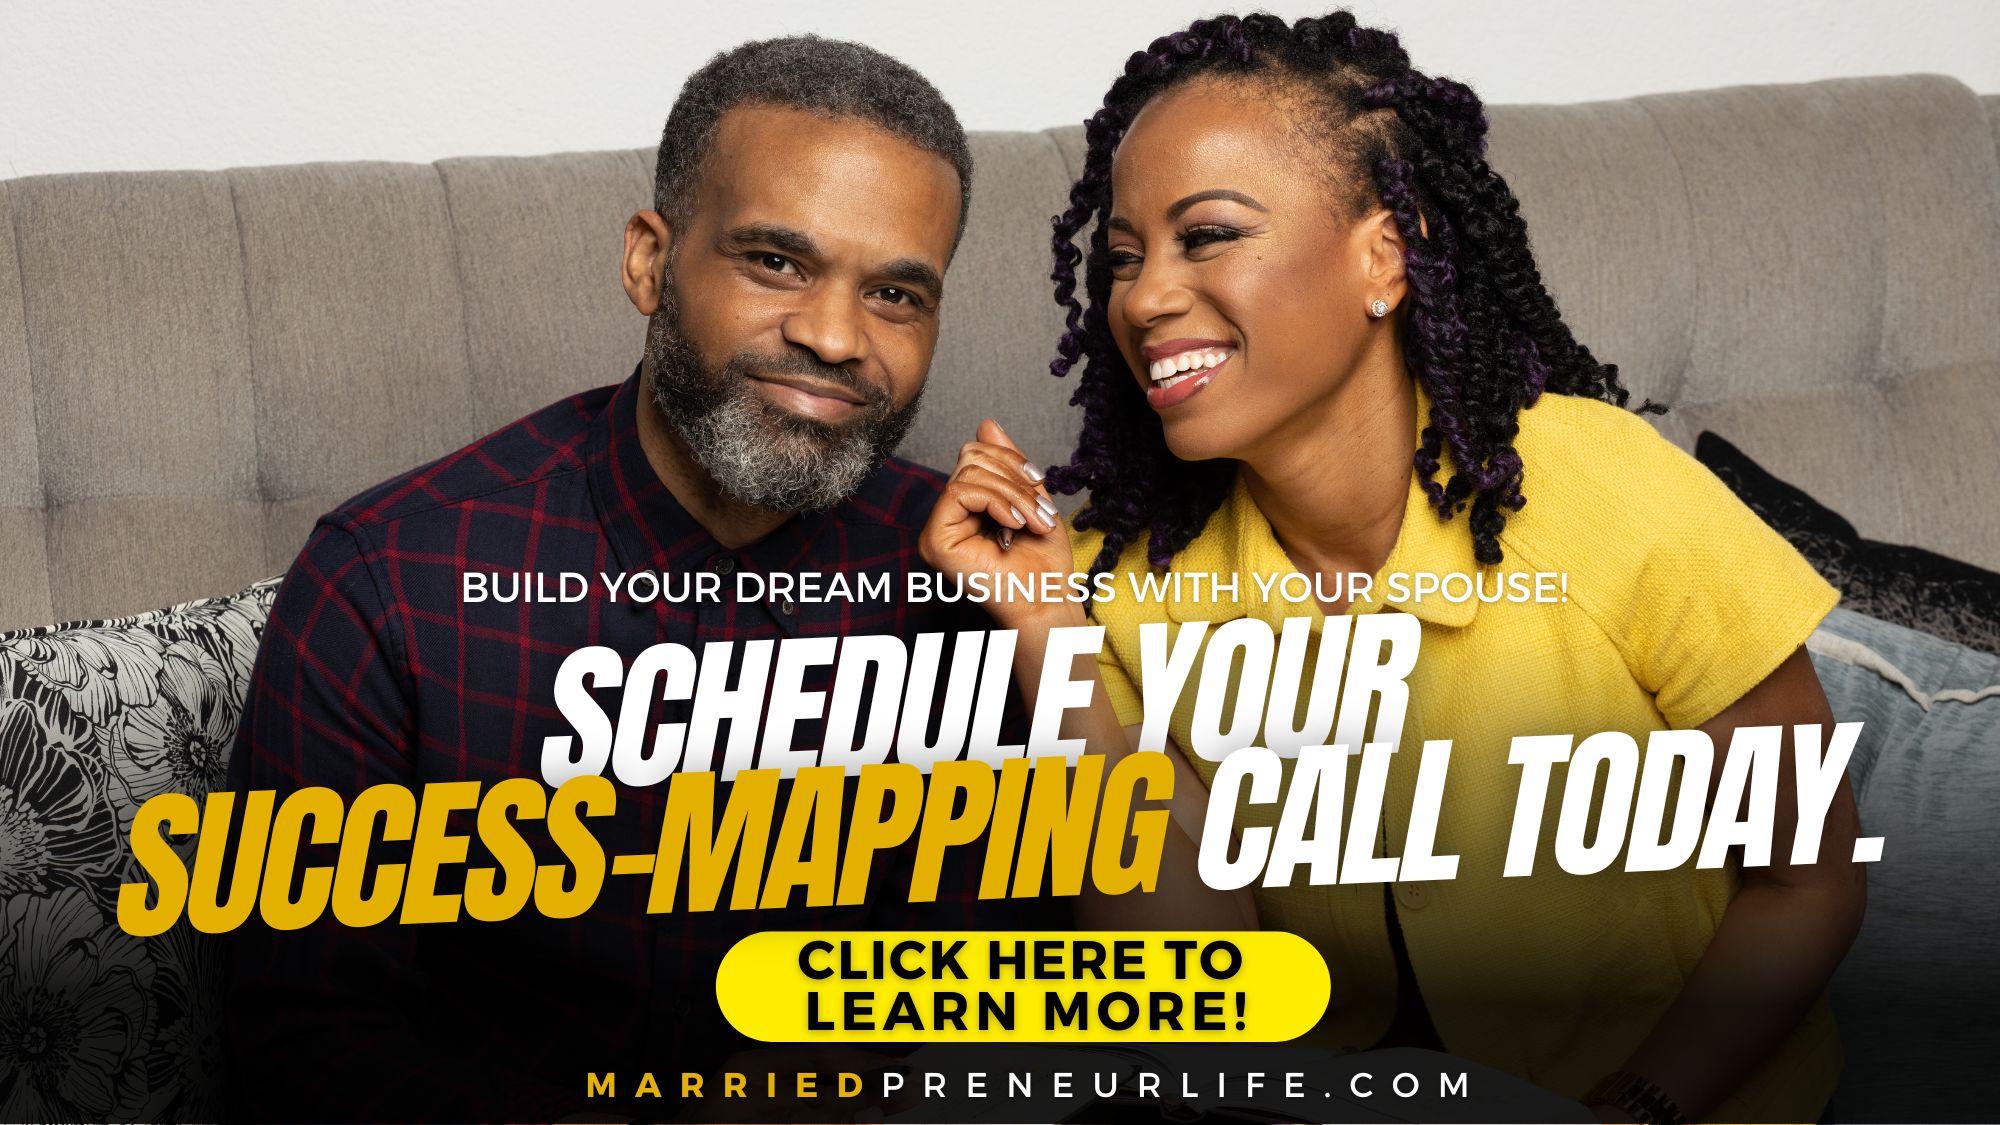 Success-Mapping Call